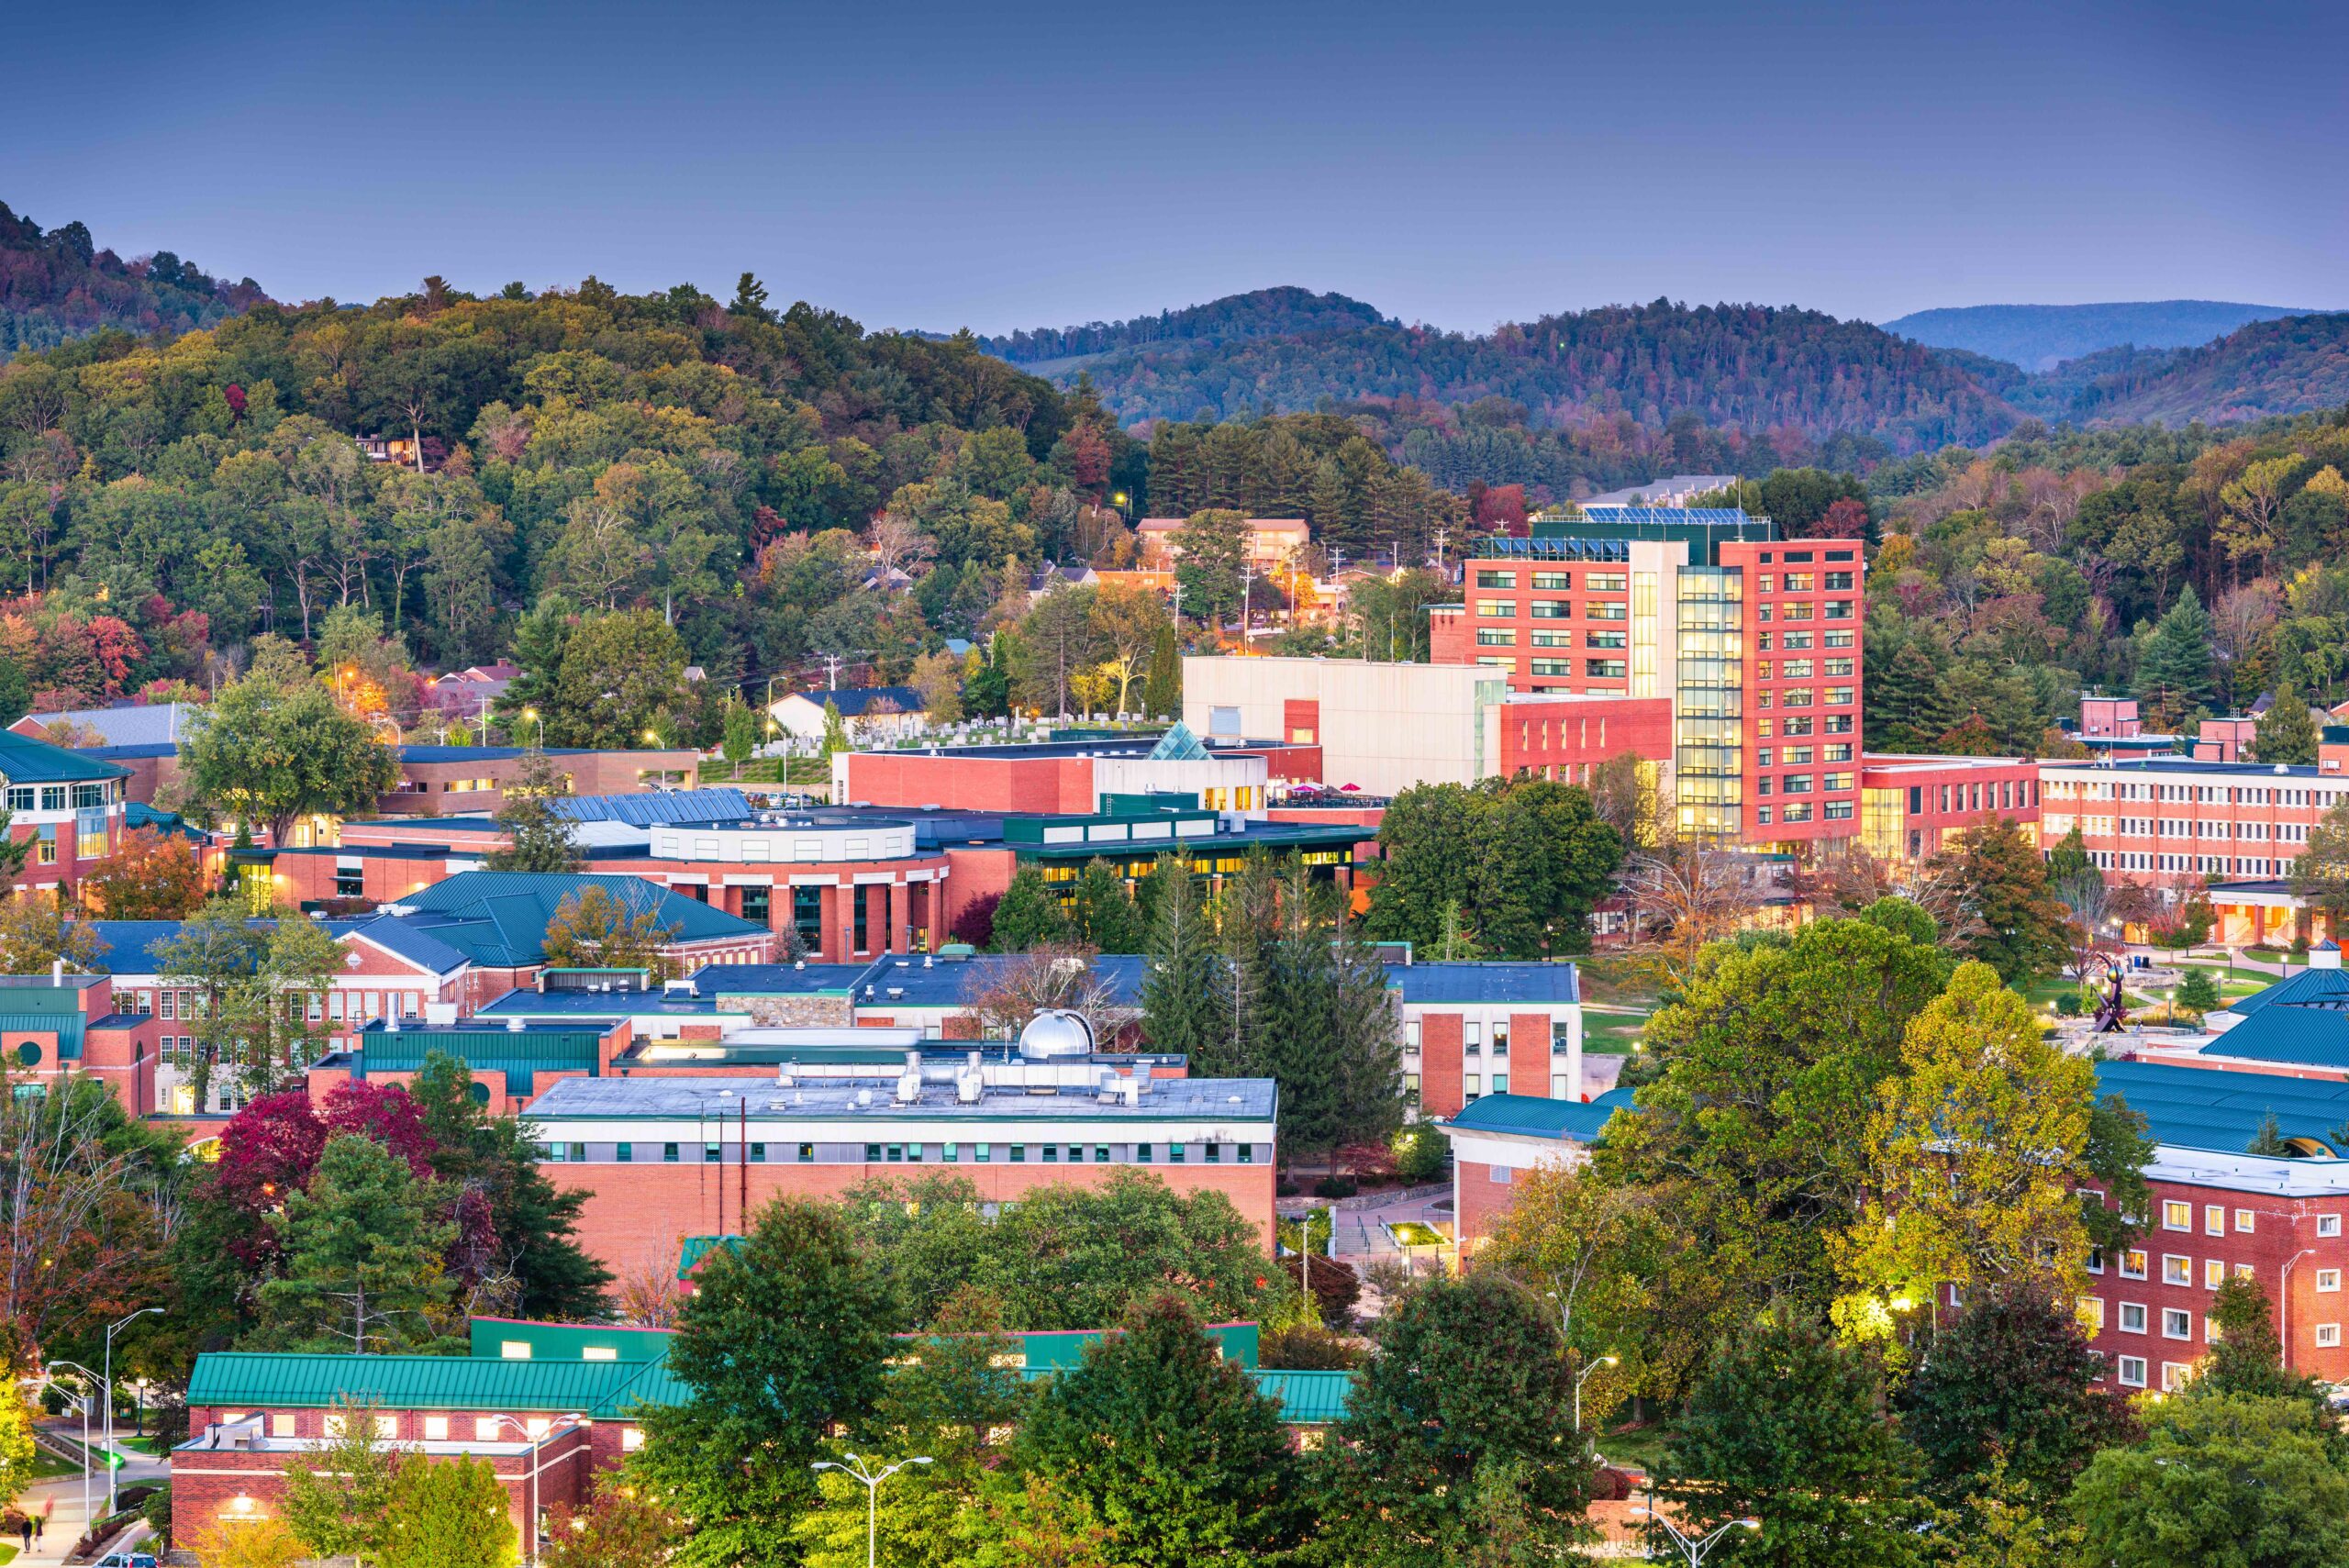 Boone in the Heart of the High Country